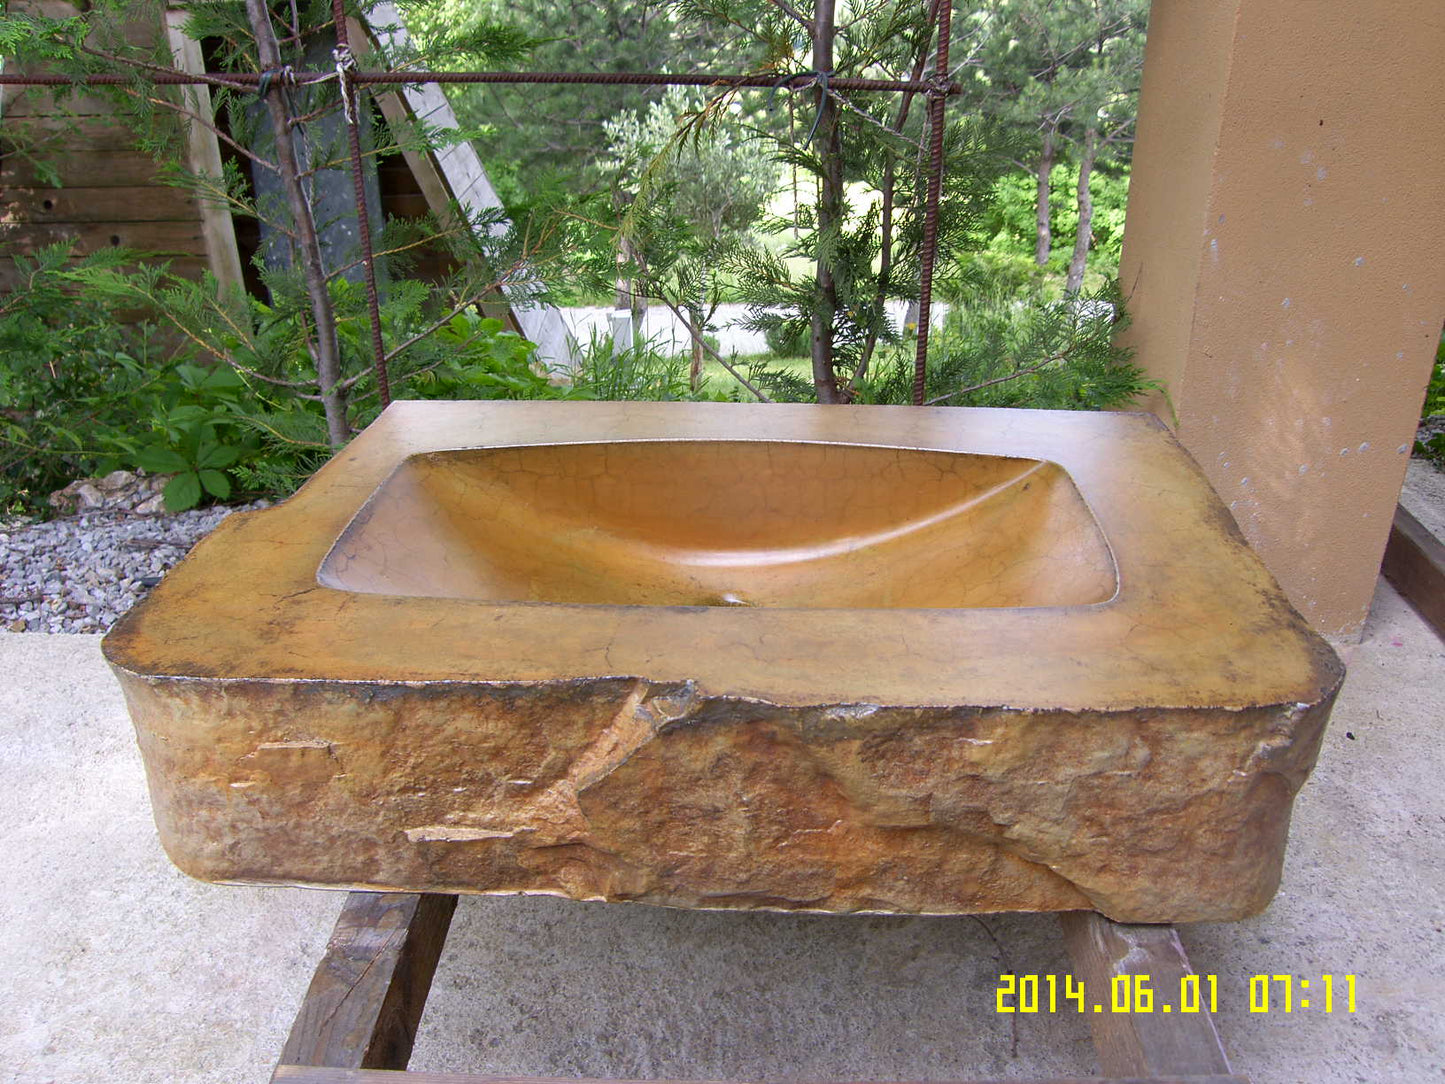 Quarry Stone A, Concrete Countertop And Fireplace Mantle Form-Liner 6-1/2" x 6'